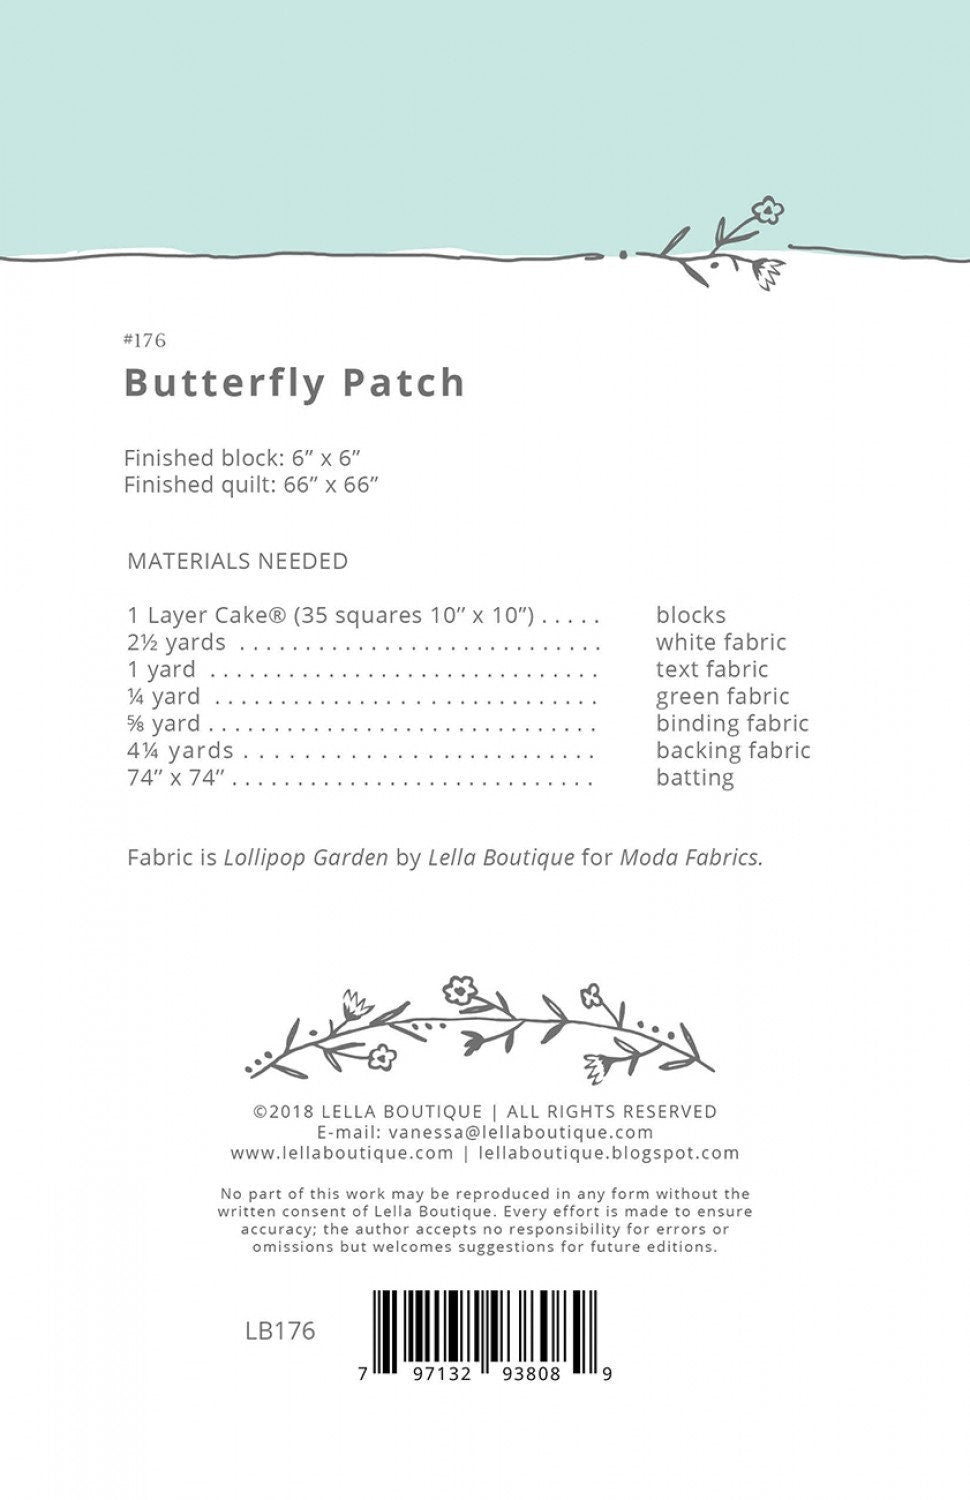 Butterfly Patch Quilt Pattern by Lella Boutique (Physical Copy)